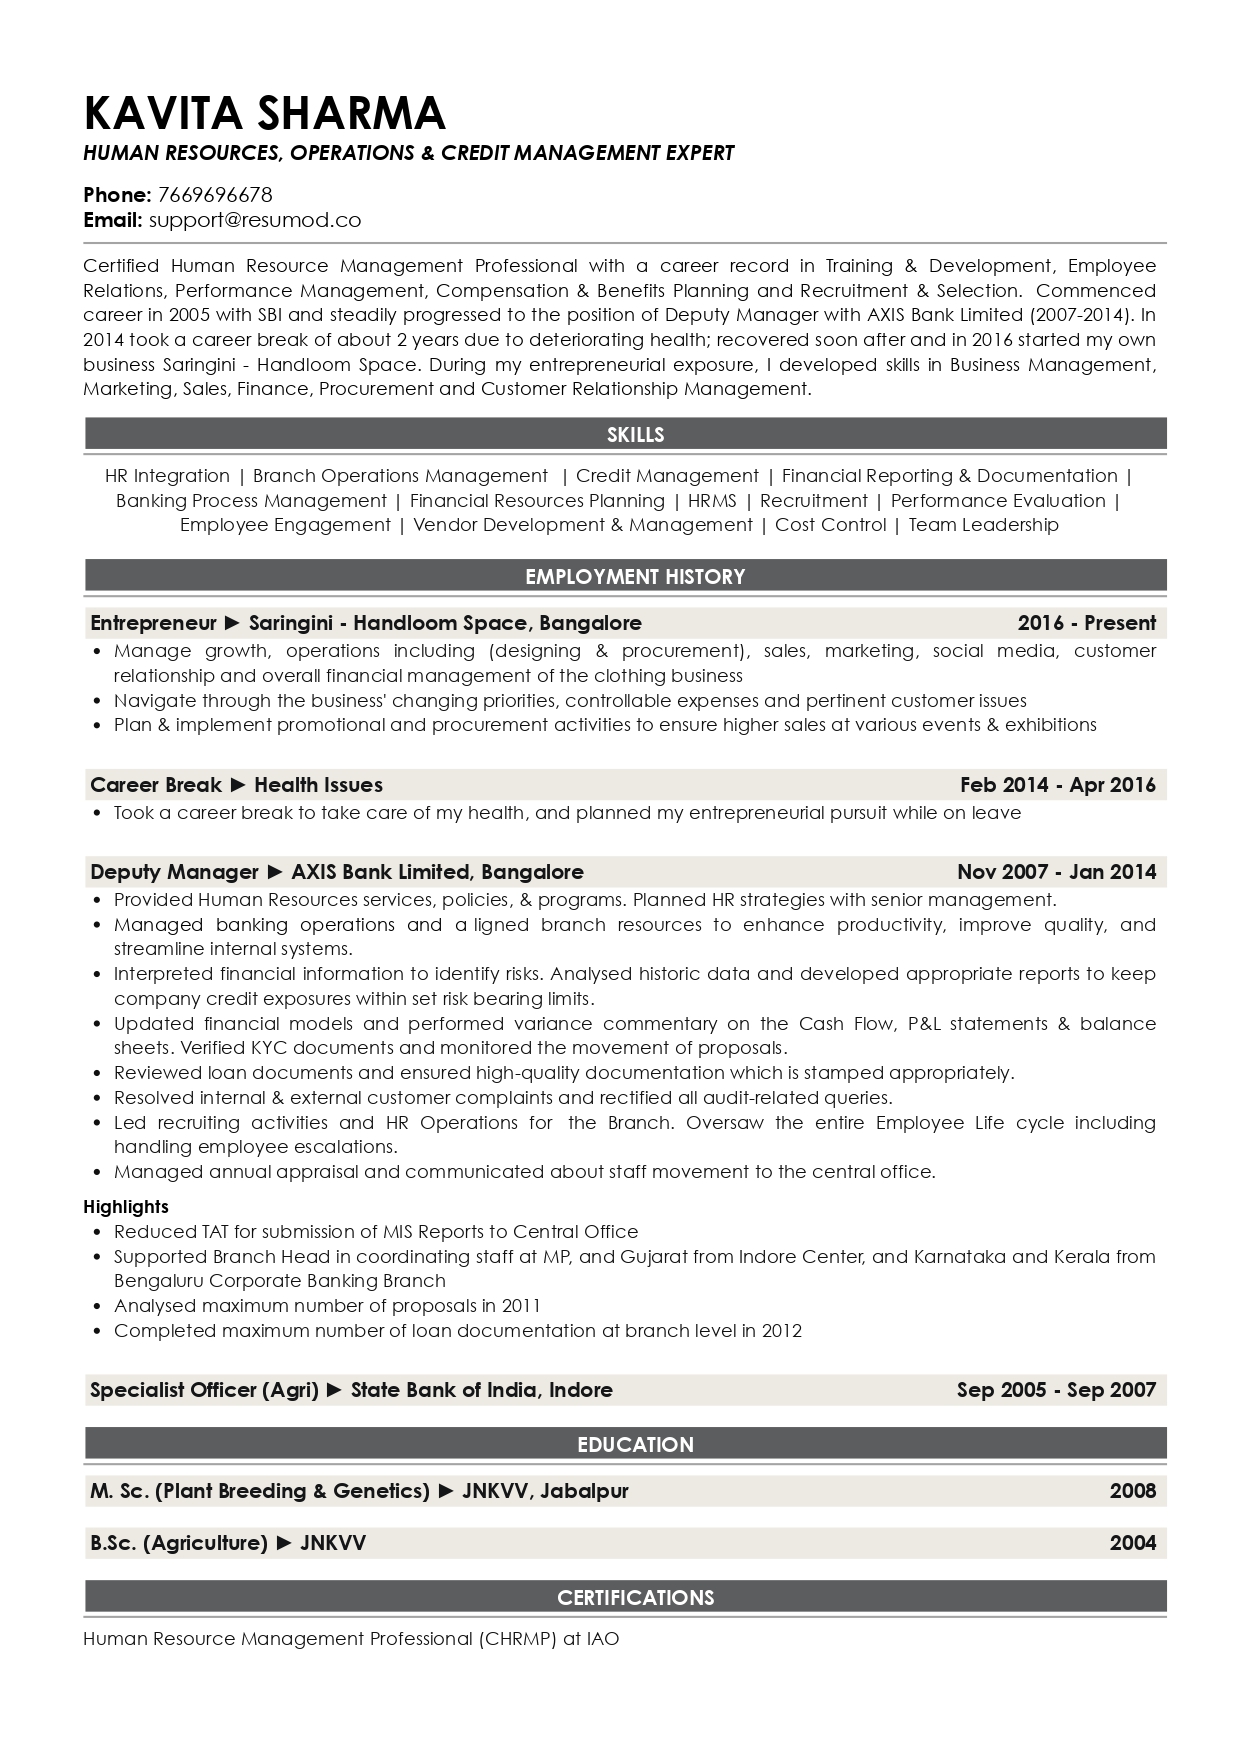 Sample Resume of HR, Operations & Credit Management Expert with Career Break | Free Resume Templates & Samples on Resumod.co